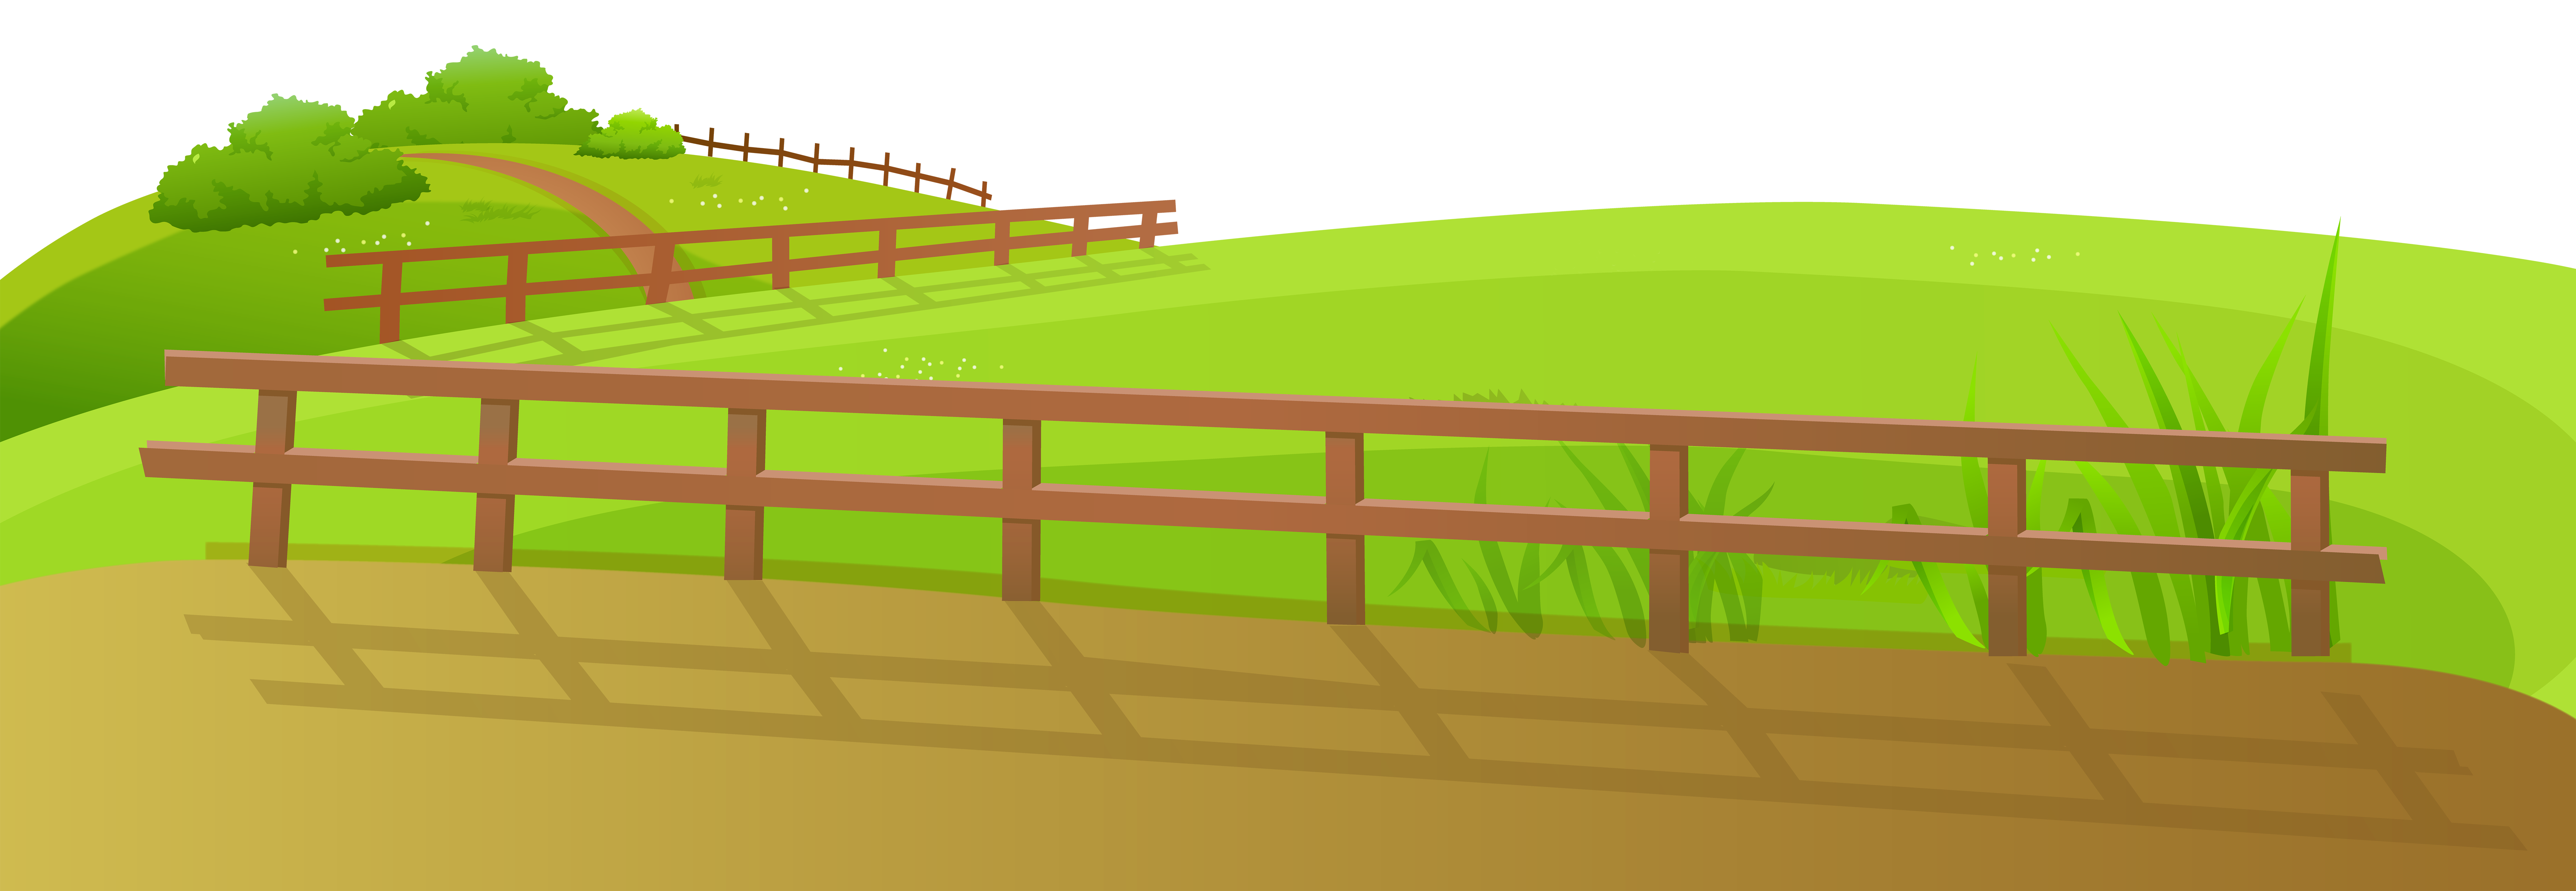 Grass clipart grass field. Ground with fence png